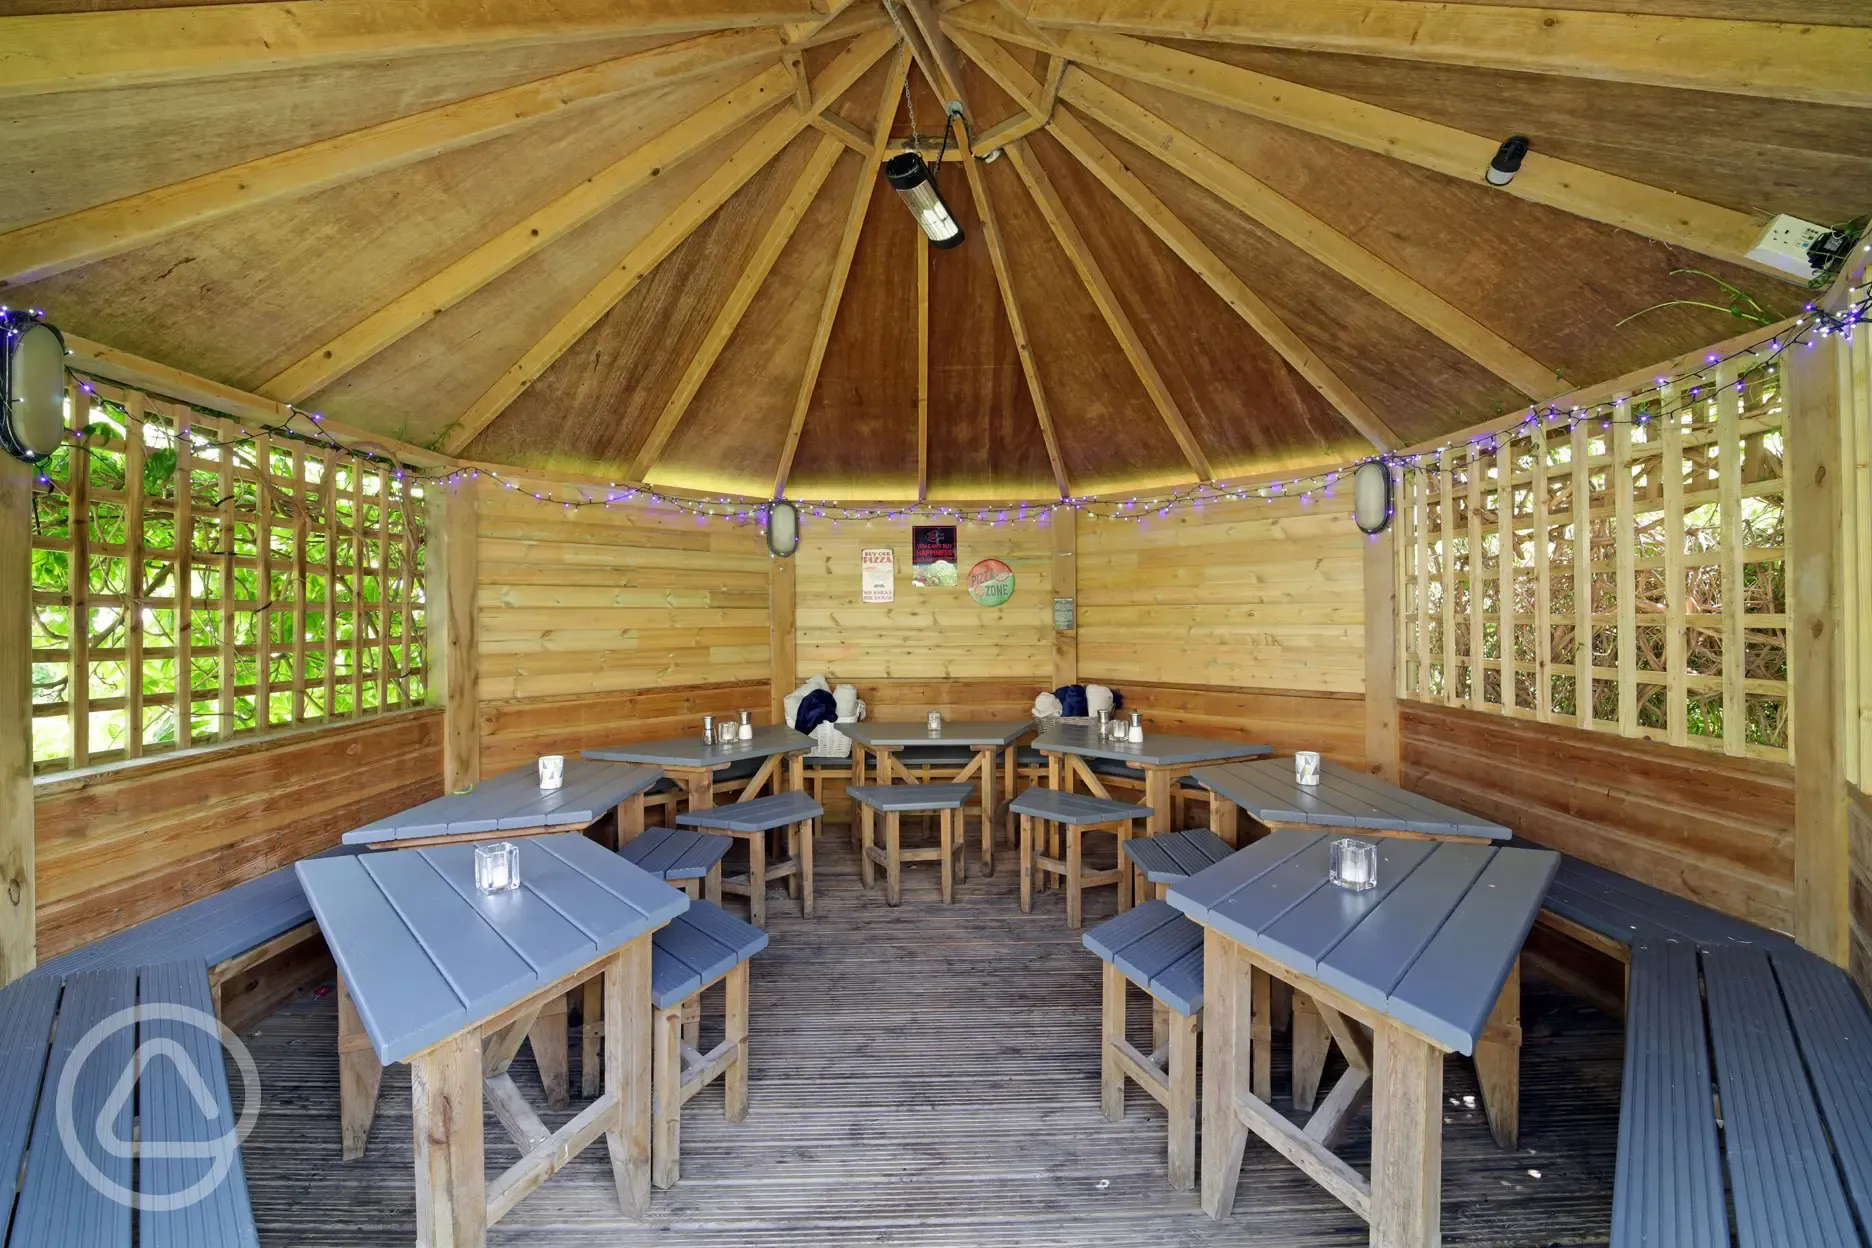 Thatched al fresco dining area